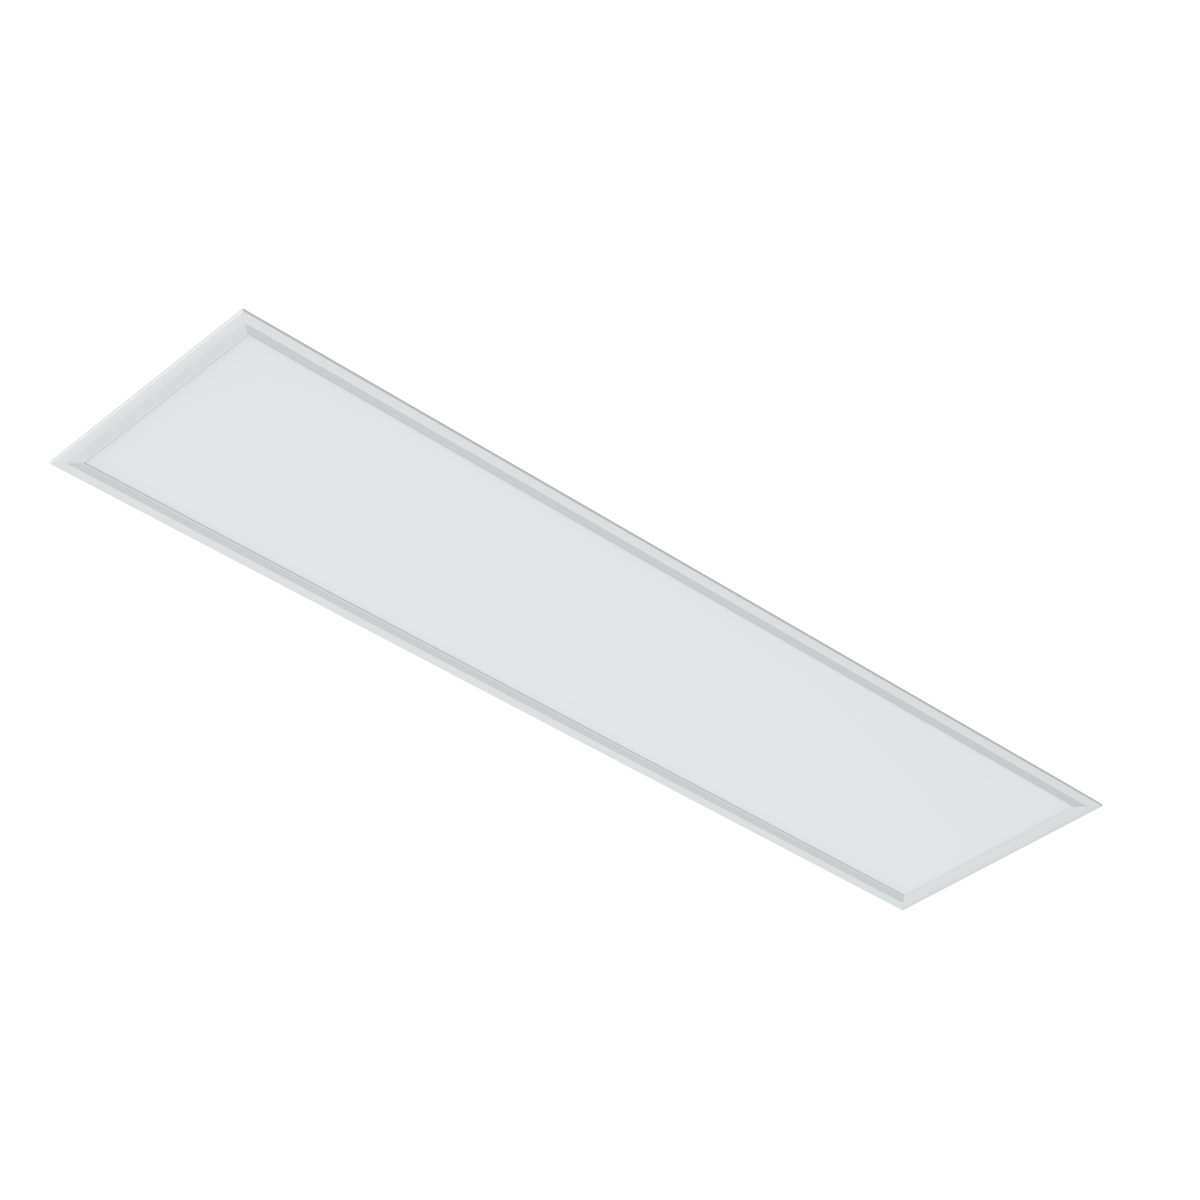 View 1200 x 300mm LED Panel Light TPa Diffuser Warm White information